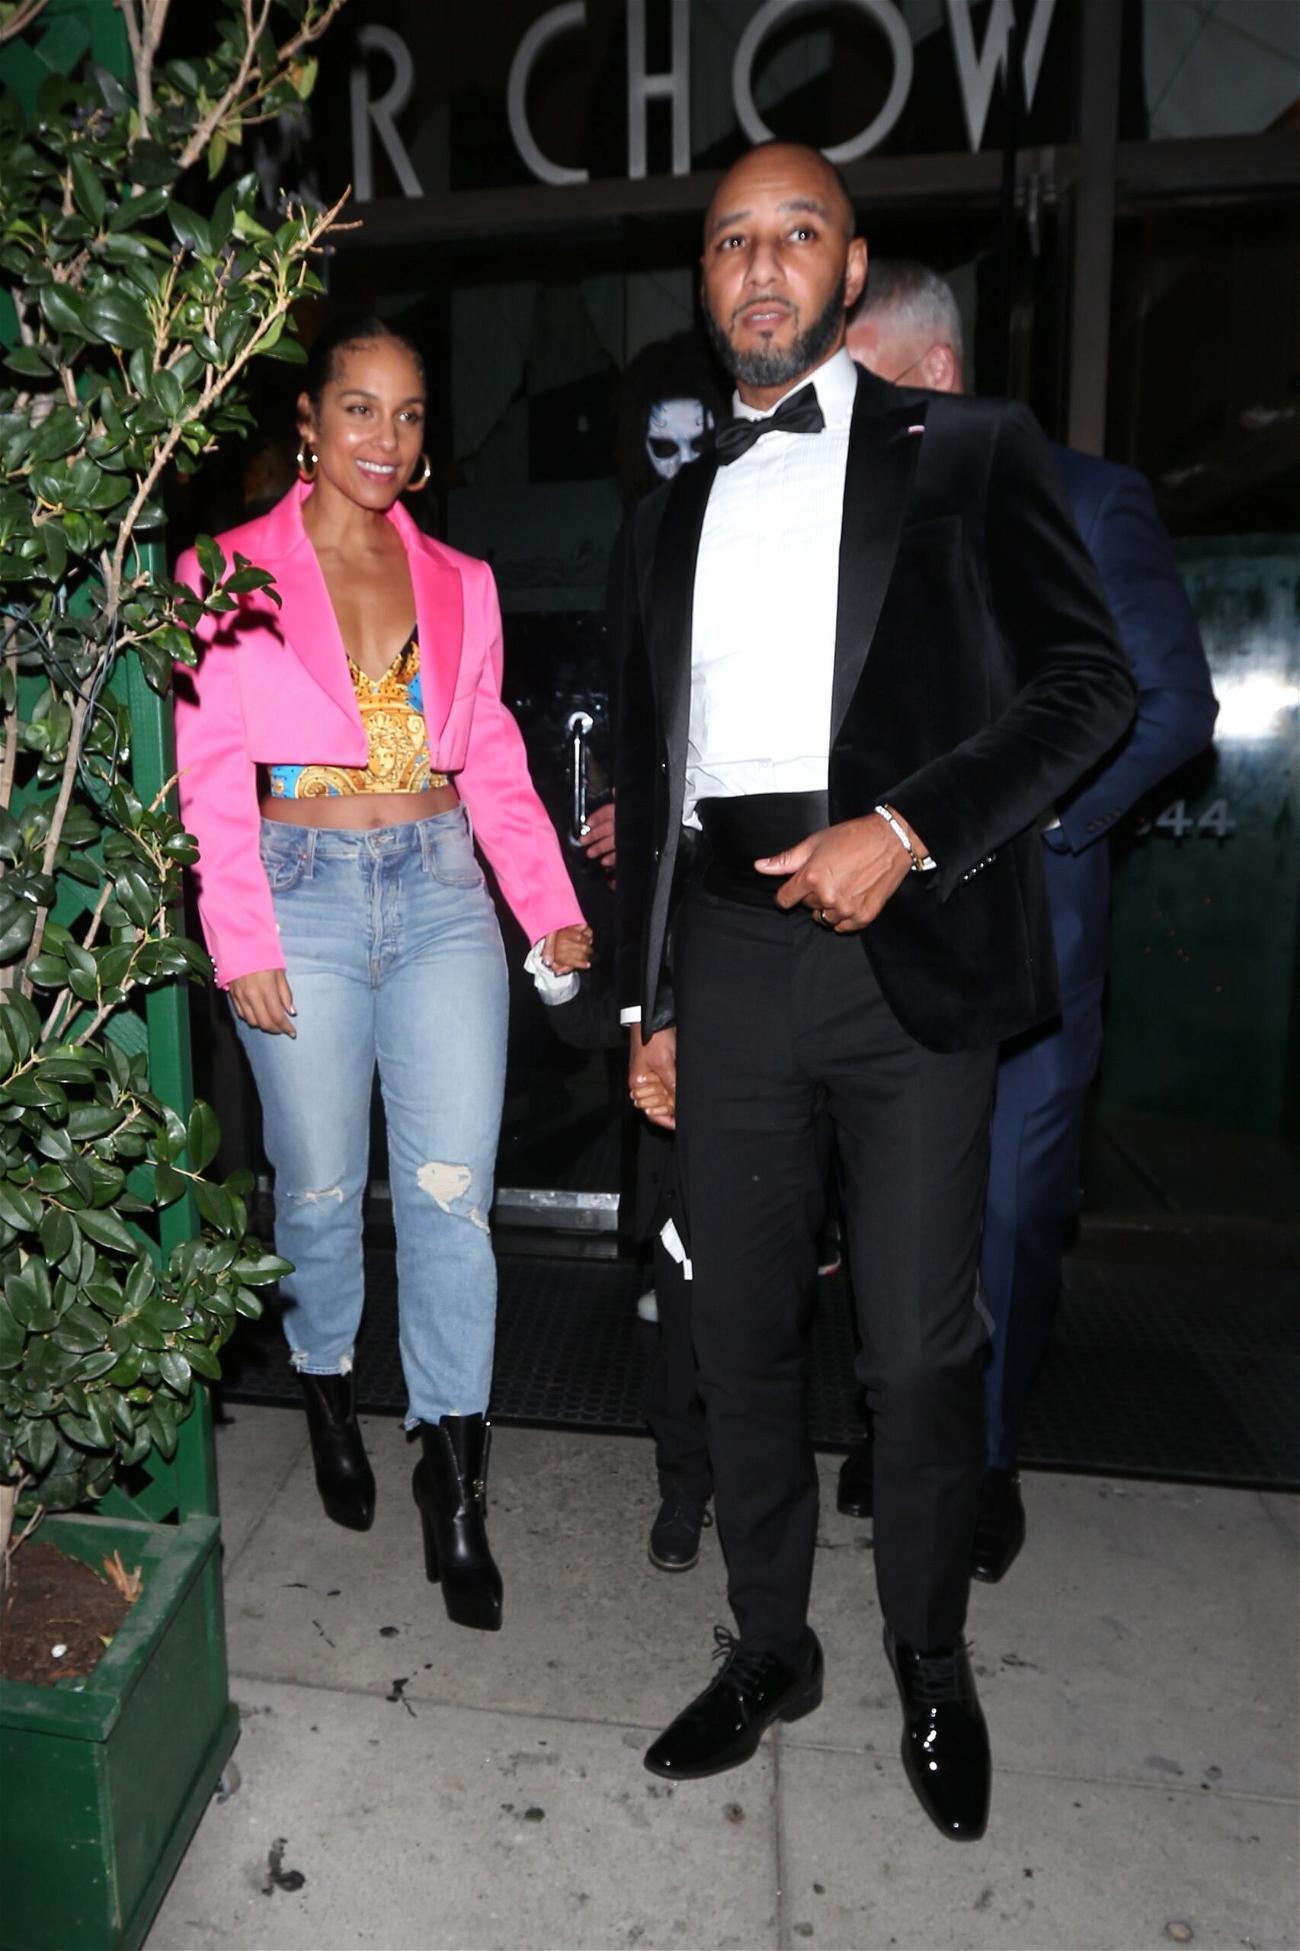 Alicia Keys and Swizz Beatz along with their son grab dinner at Mr Chow apos s after hosting the 2020 Grammy apos s